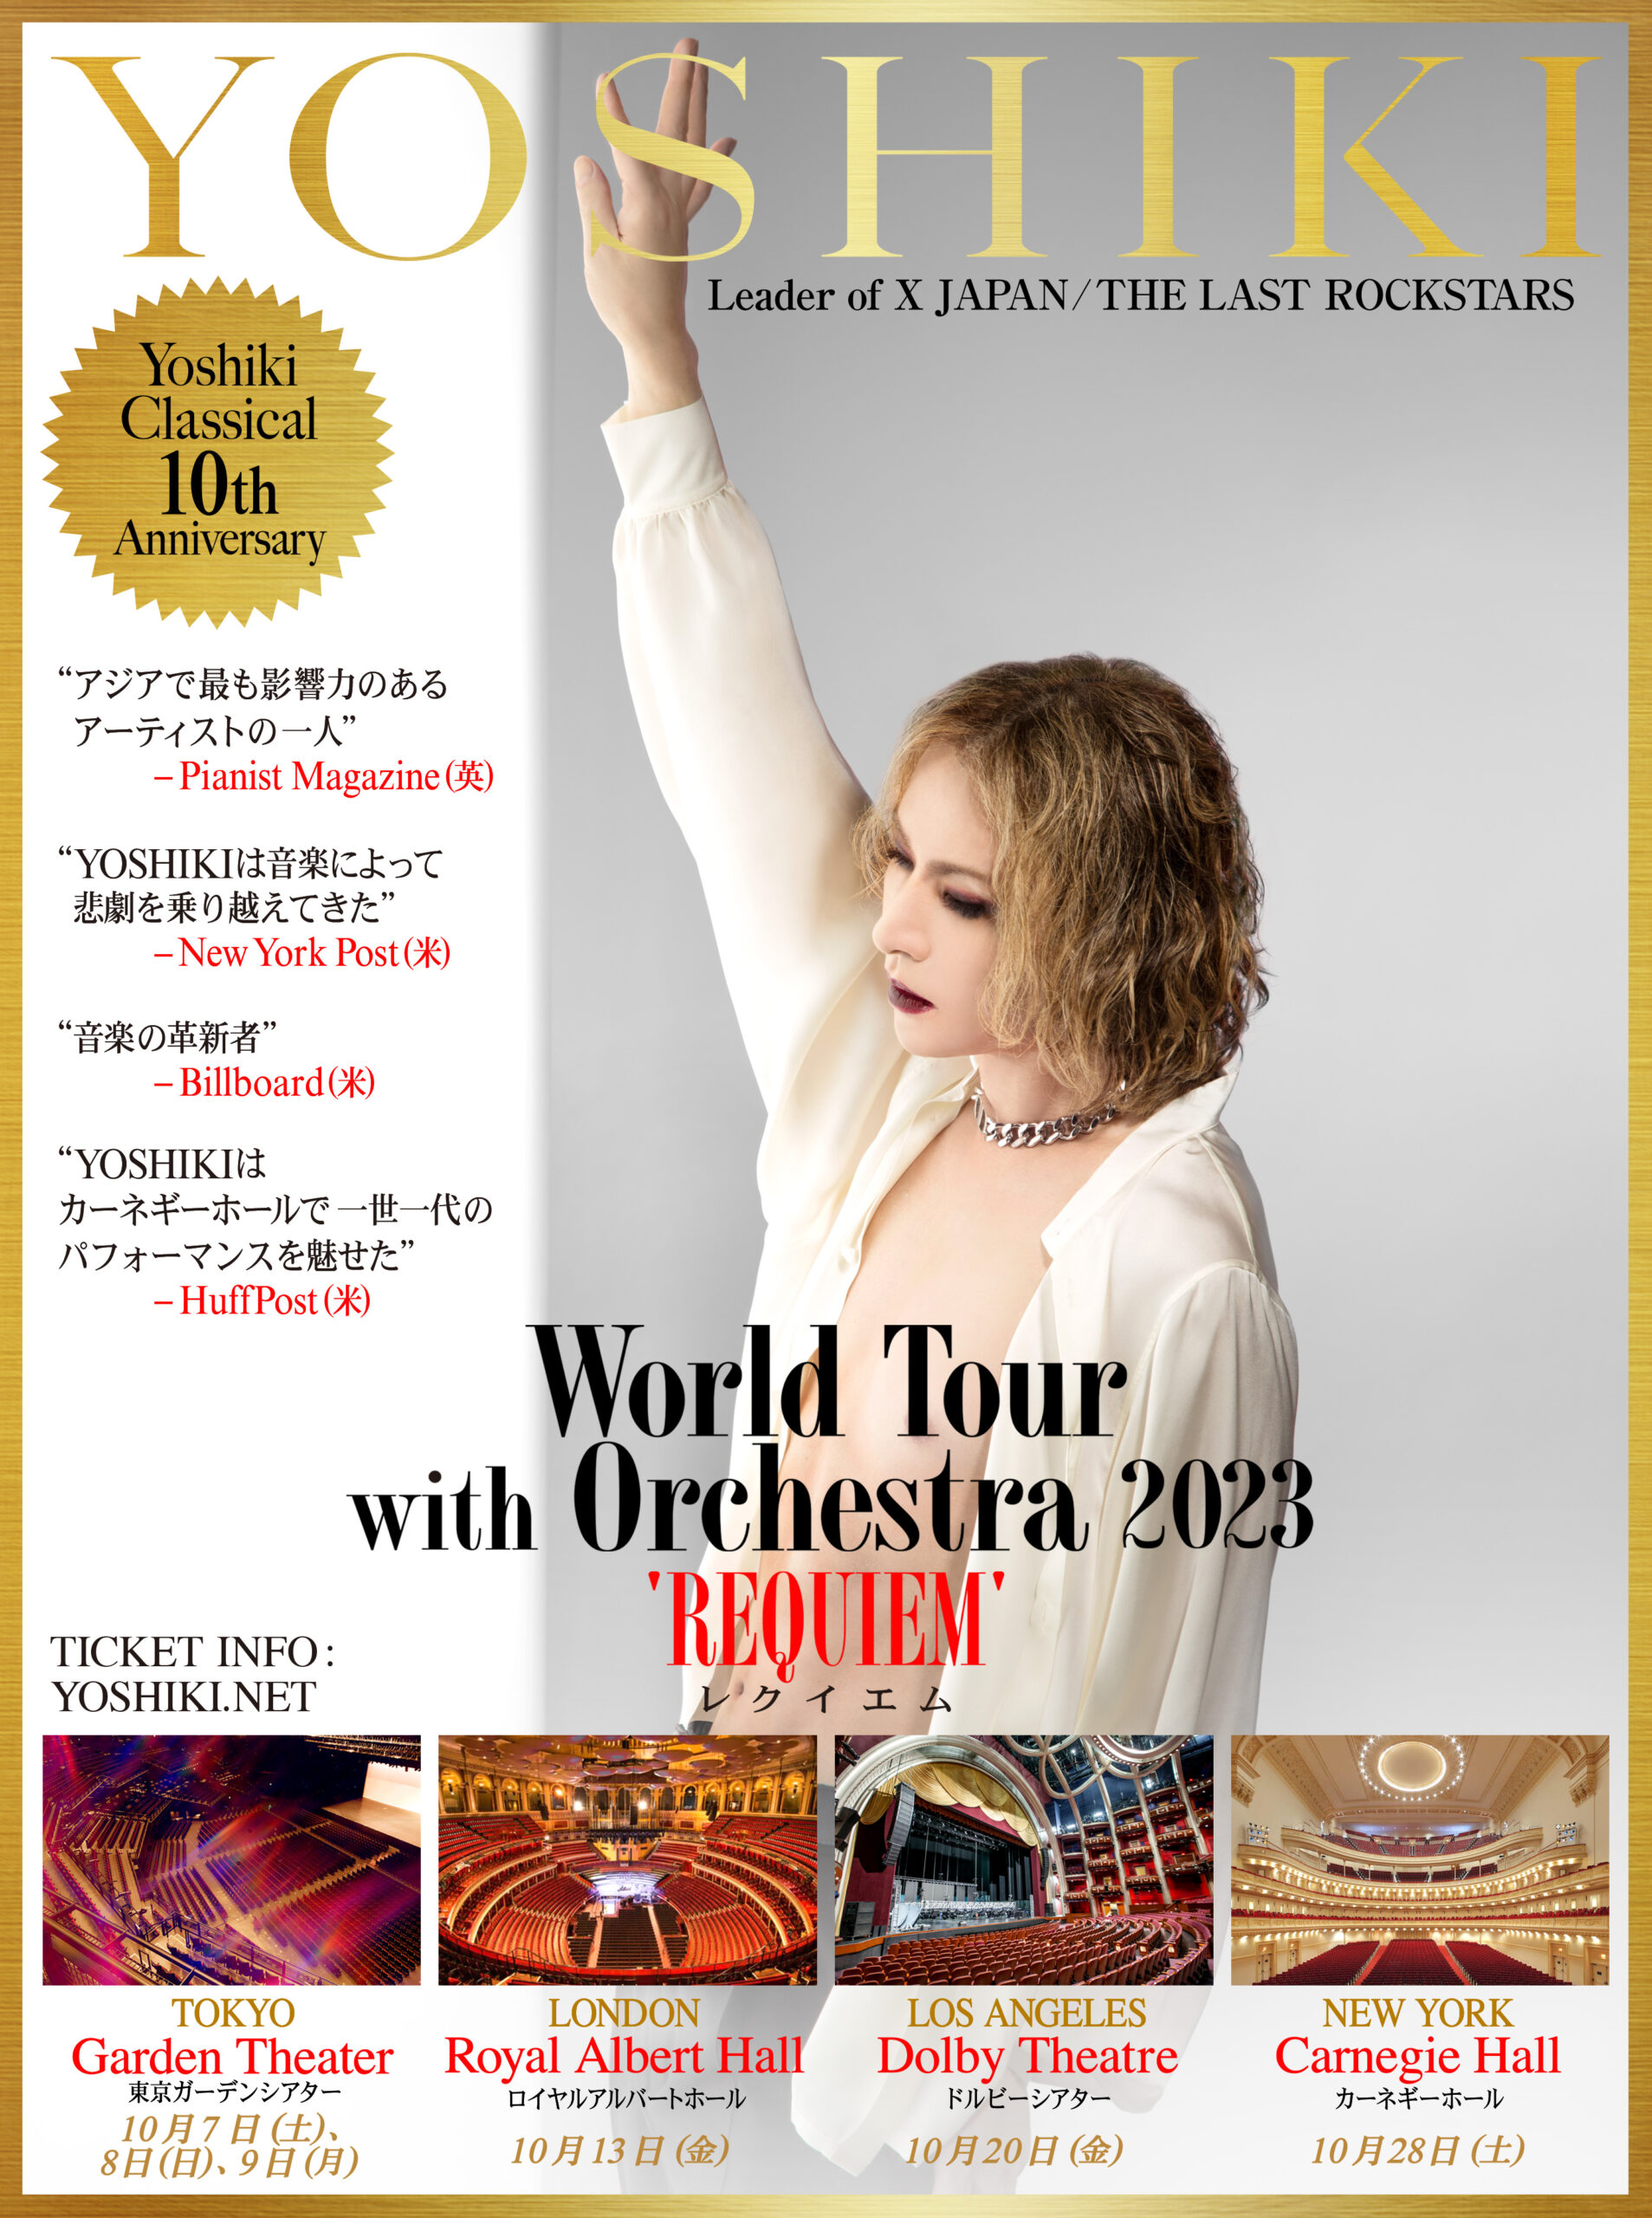 YOSHIKI CLASSICAL 10th Anniversary World Tour with Orchestra 2023